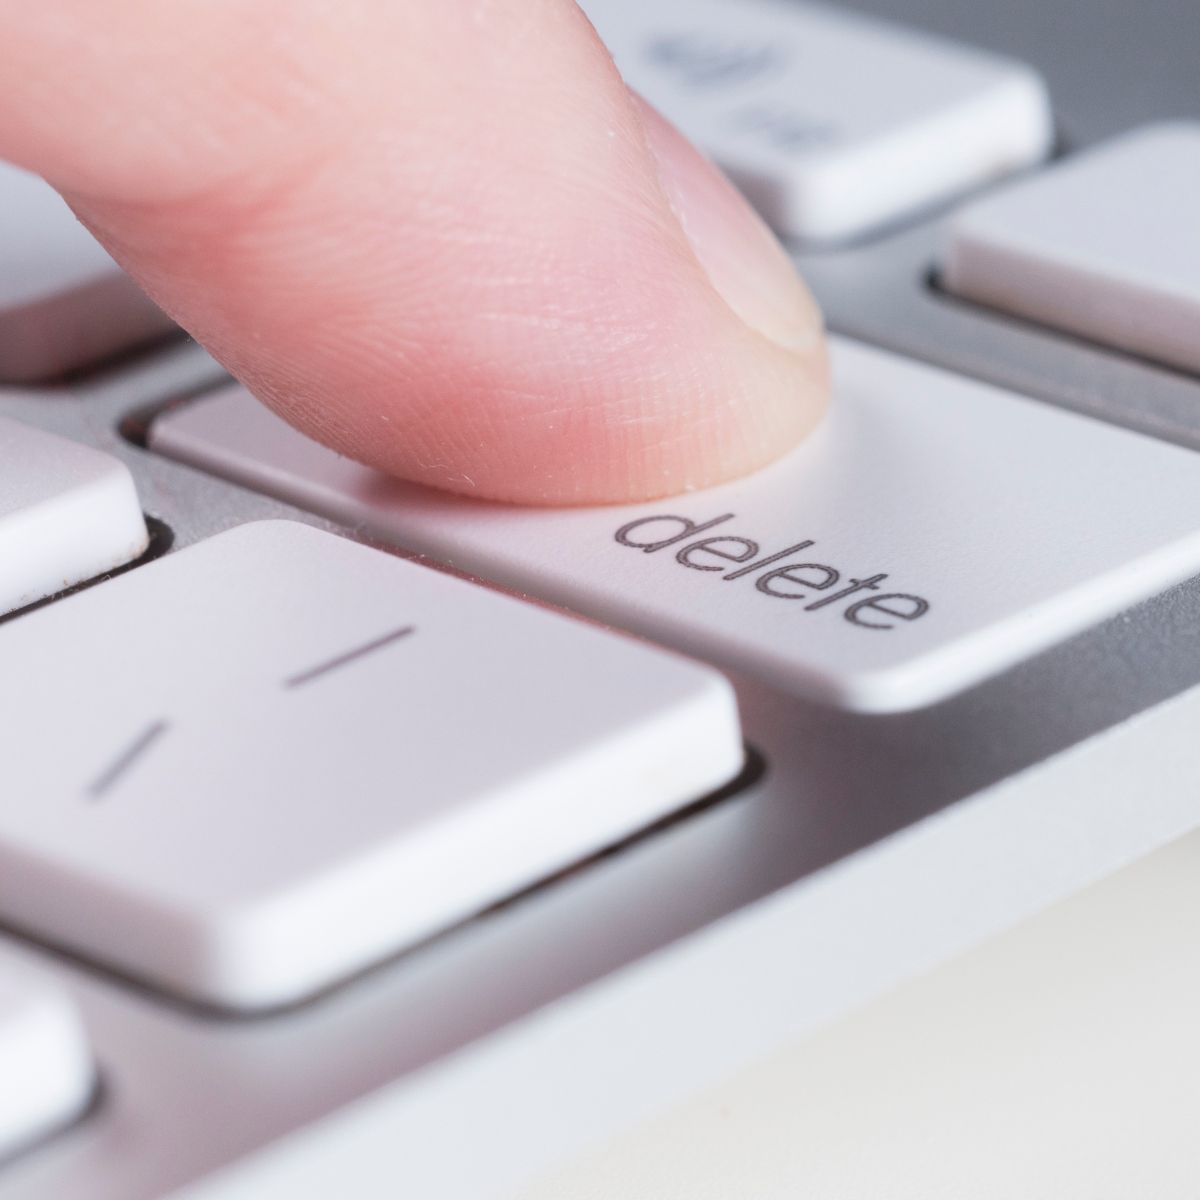 A close-up of a finger pressing a white delete button on a Mac keyboard.